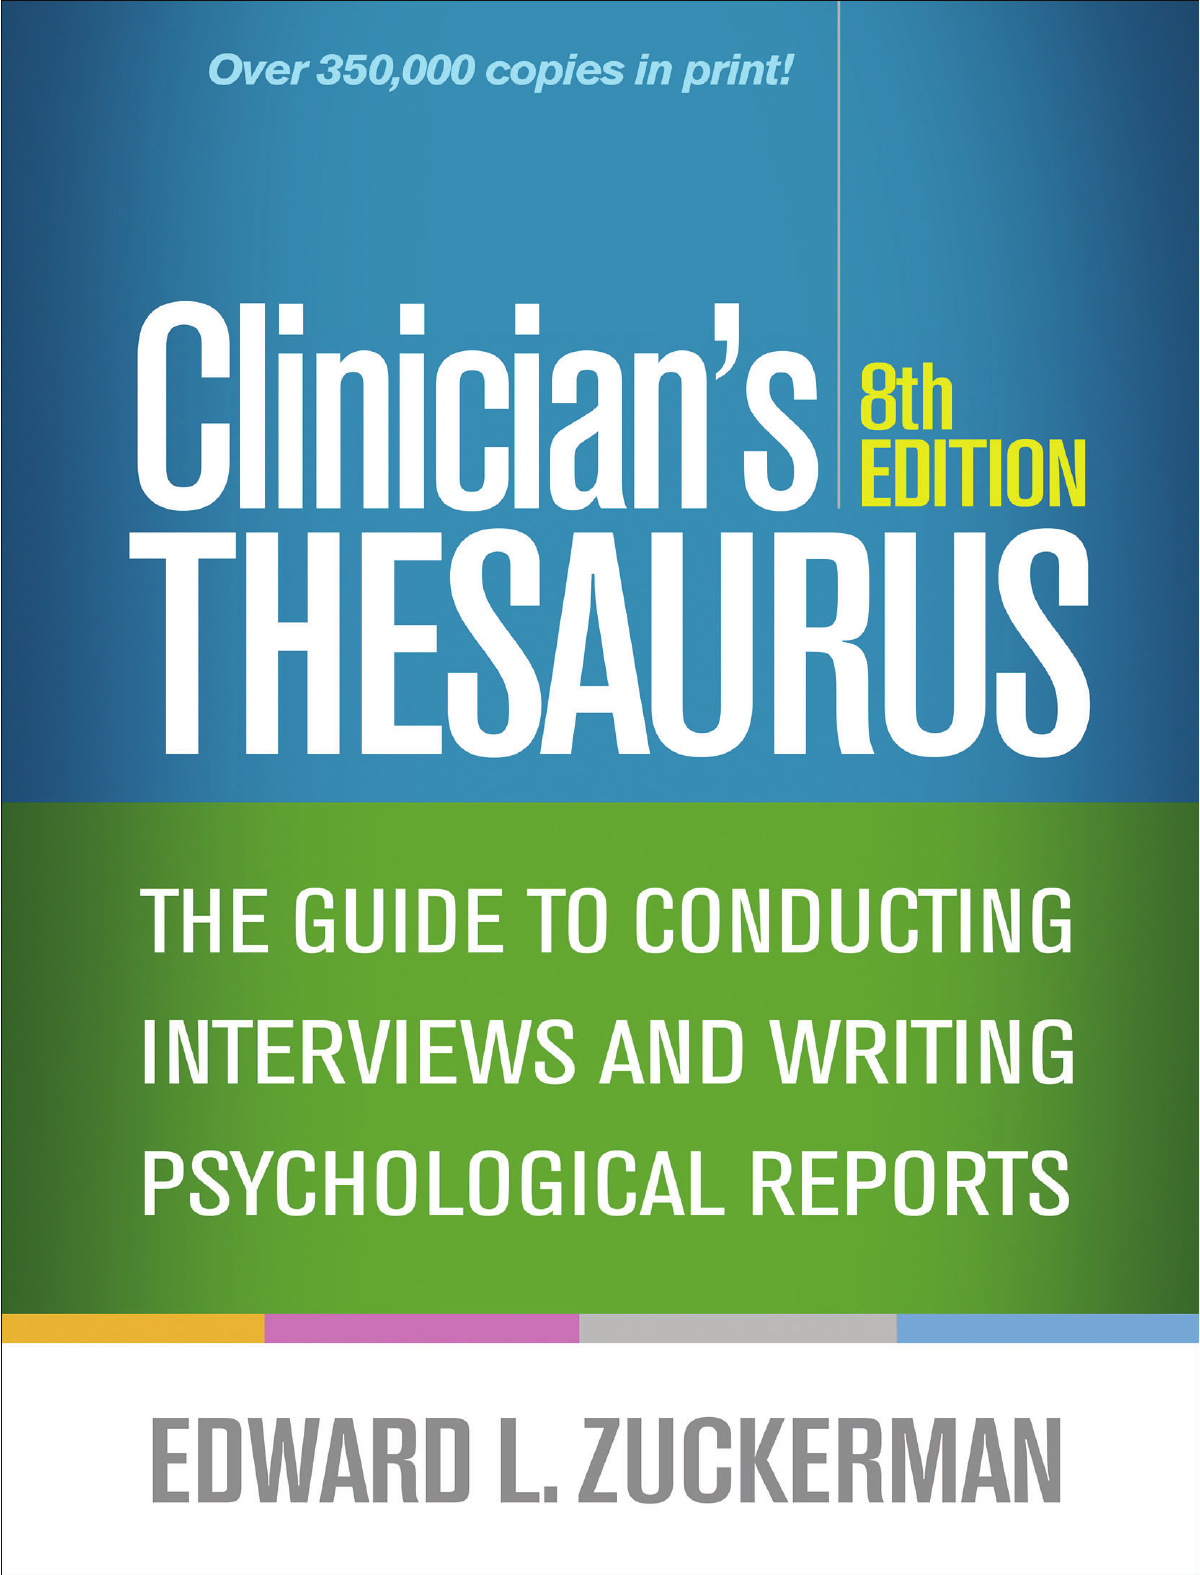 Clinicians Thesaurus 8th Edition The Guide to Conducting Interview